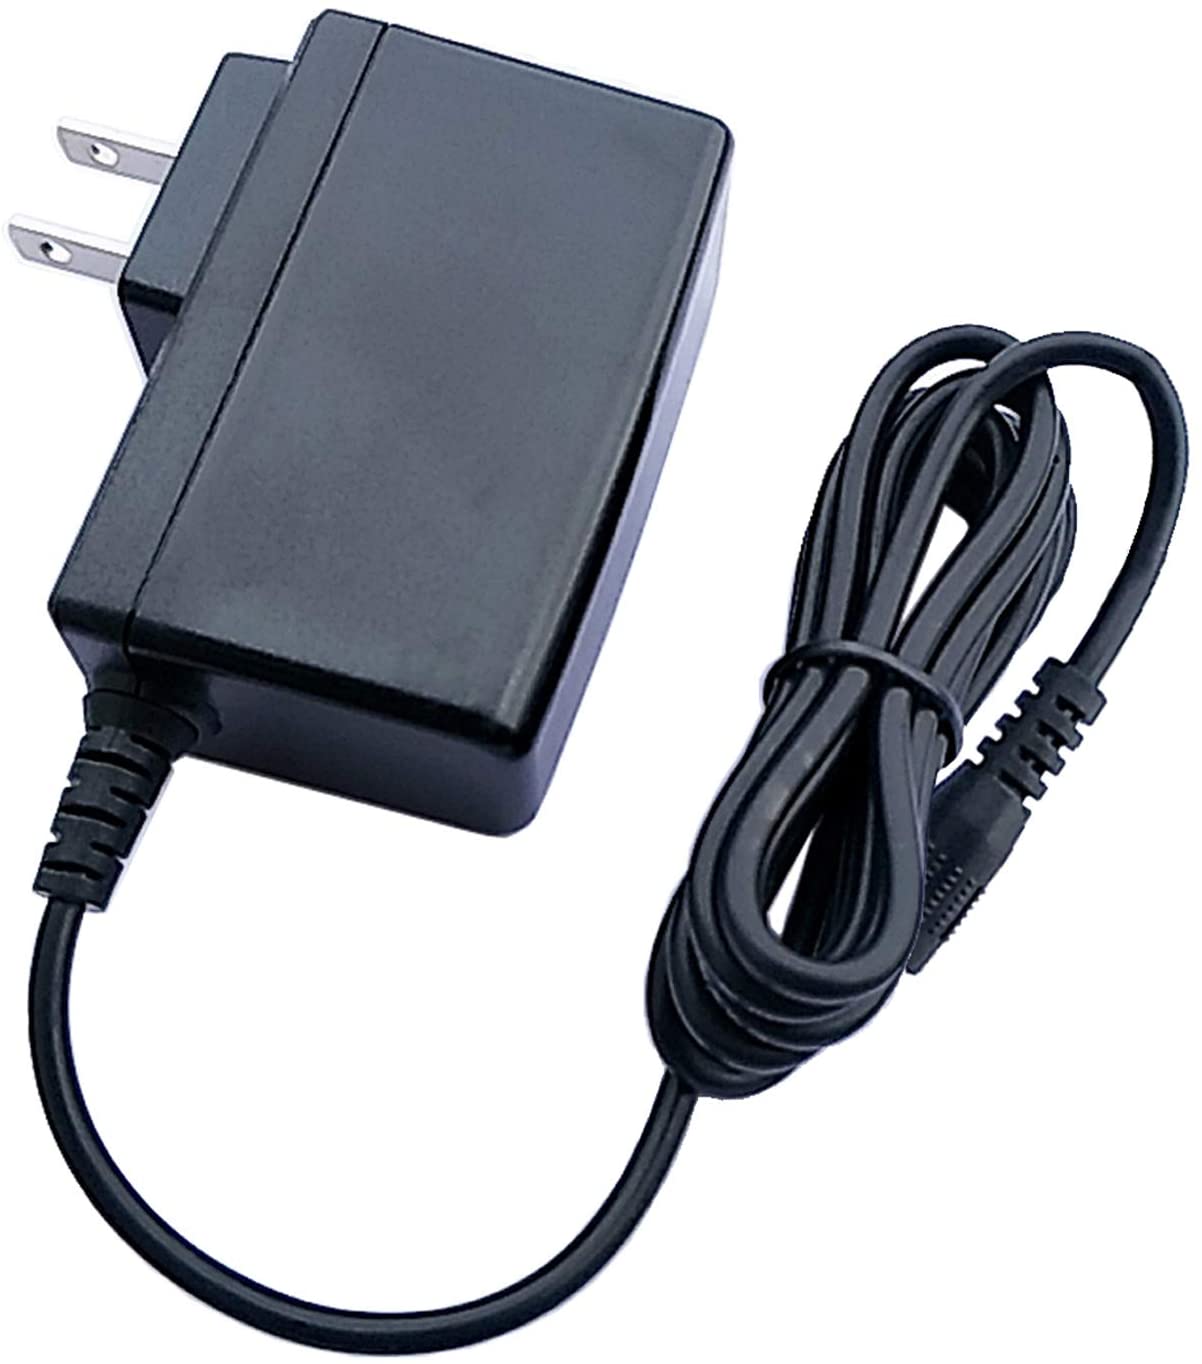 UPBRIGHT NEW Global AC / DC Adapter For DJ-Tech i-Mix Reload MKII iMix Reload MK II ReloadMKII ReloadMK II i-MIXMKII iMIXMKII i-MIX MKII i-MIX MK II i-MIXMK II iMIX MKII DJTech USB DJ Midi Mixer Contr - image 2 of 2